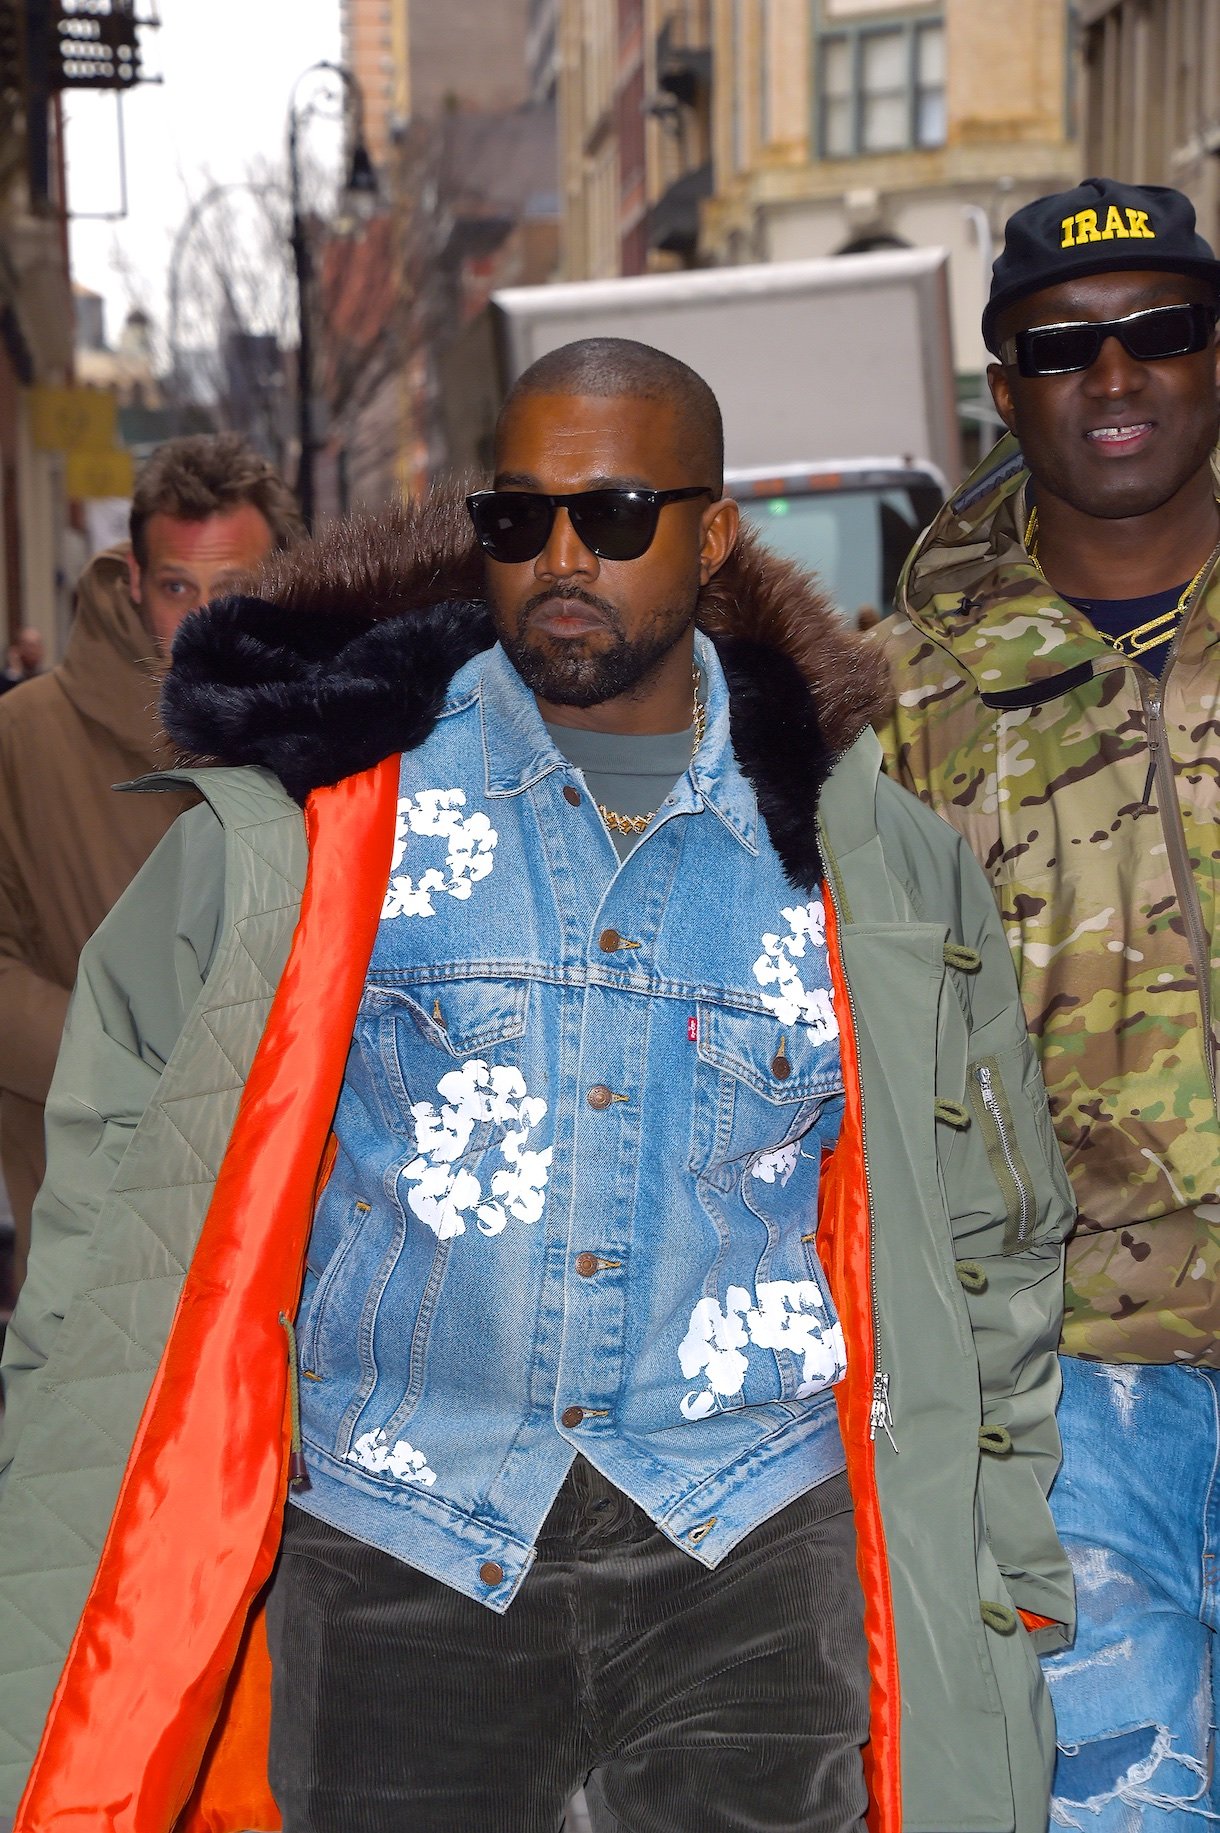 Kanye West's Shocking Reaction To Being Made Fun of on 'South Park'